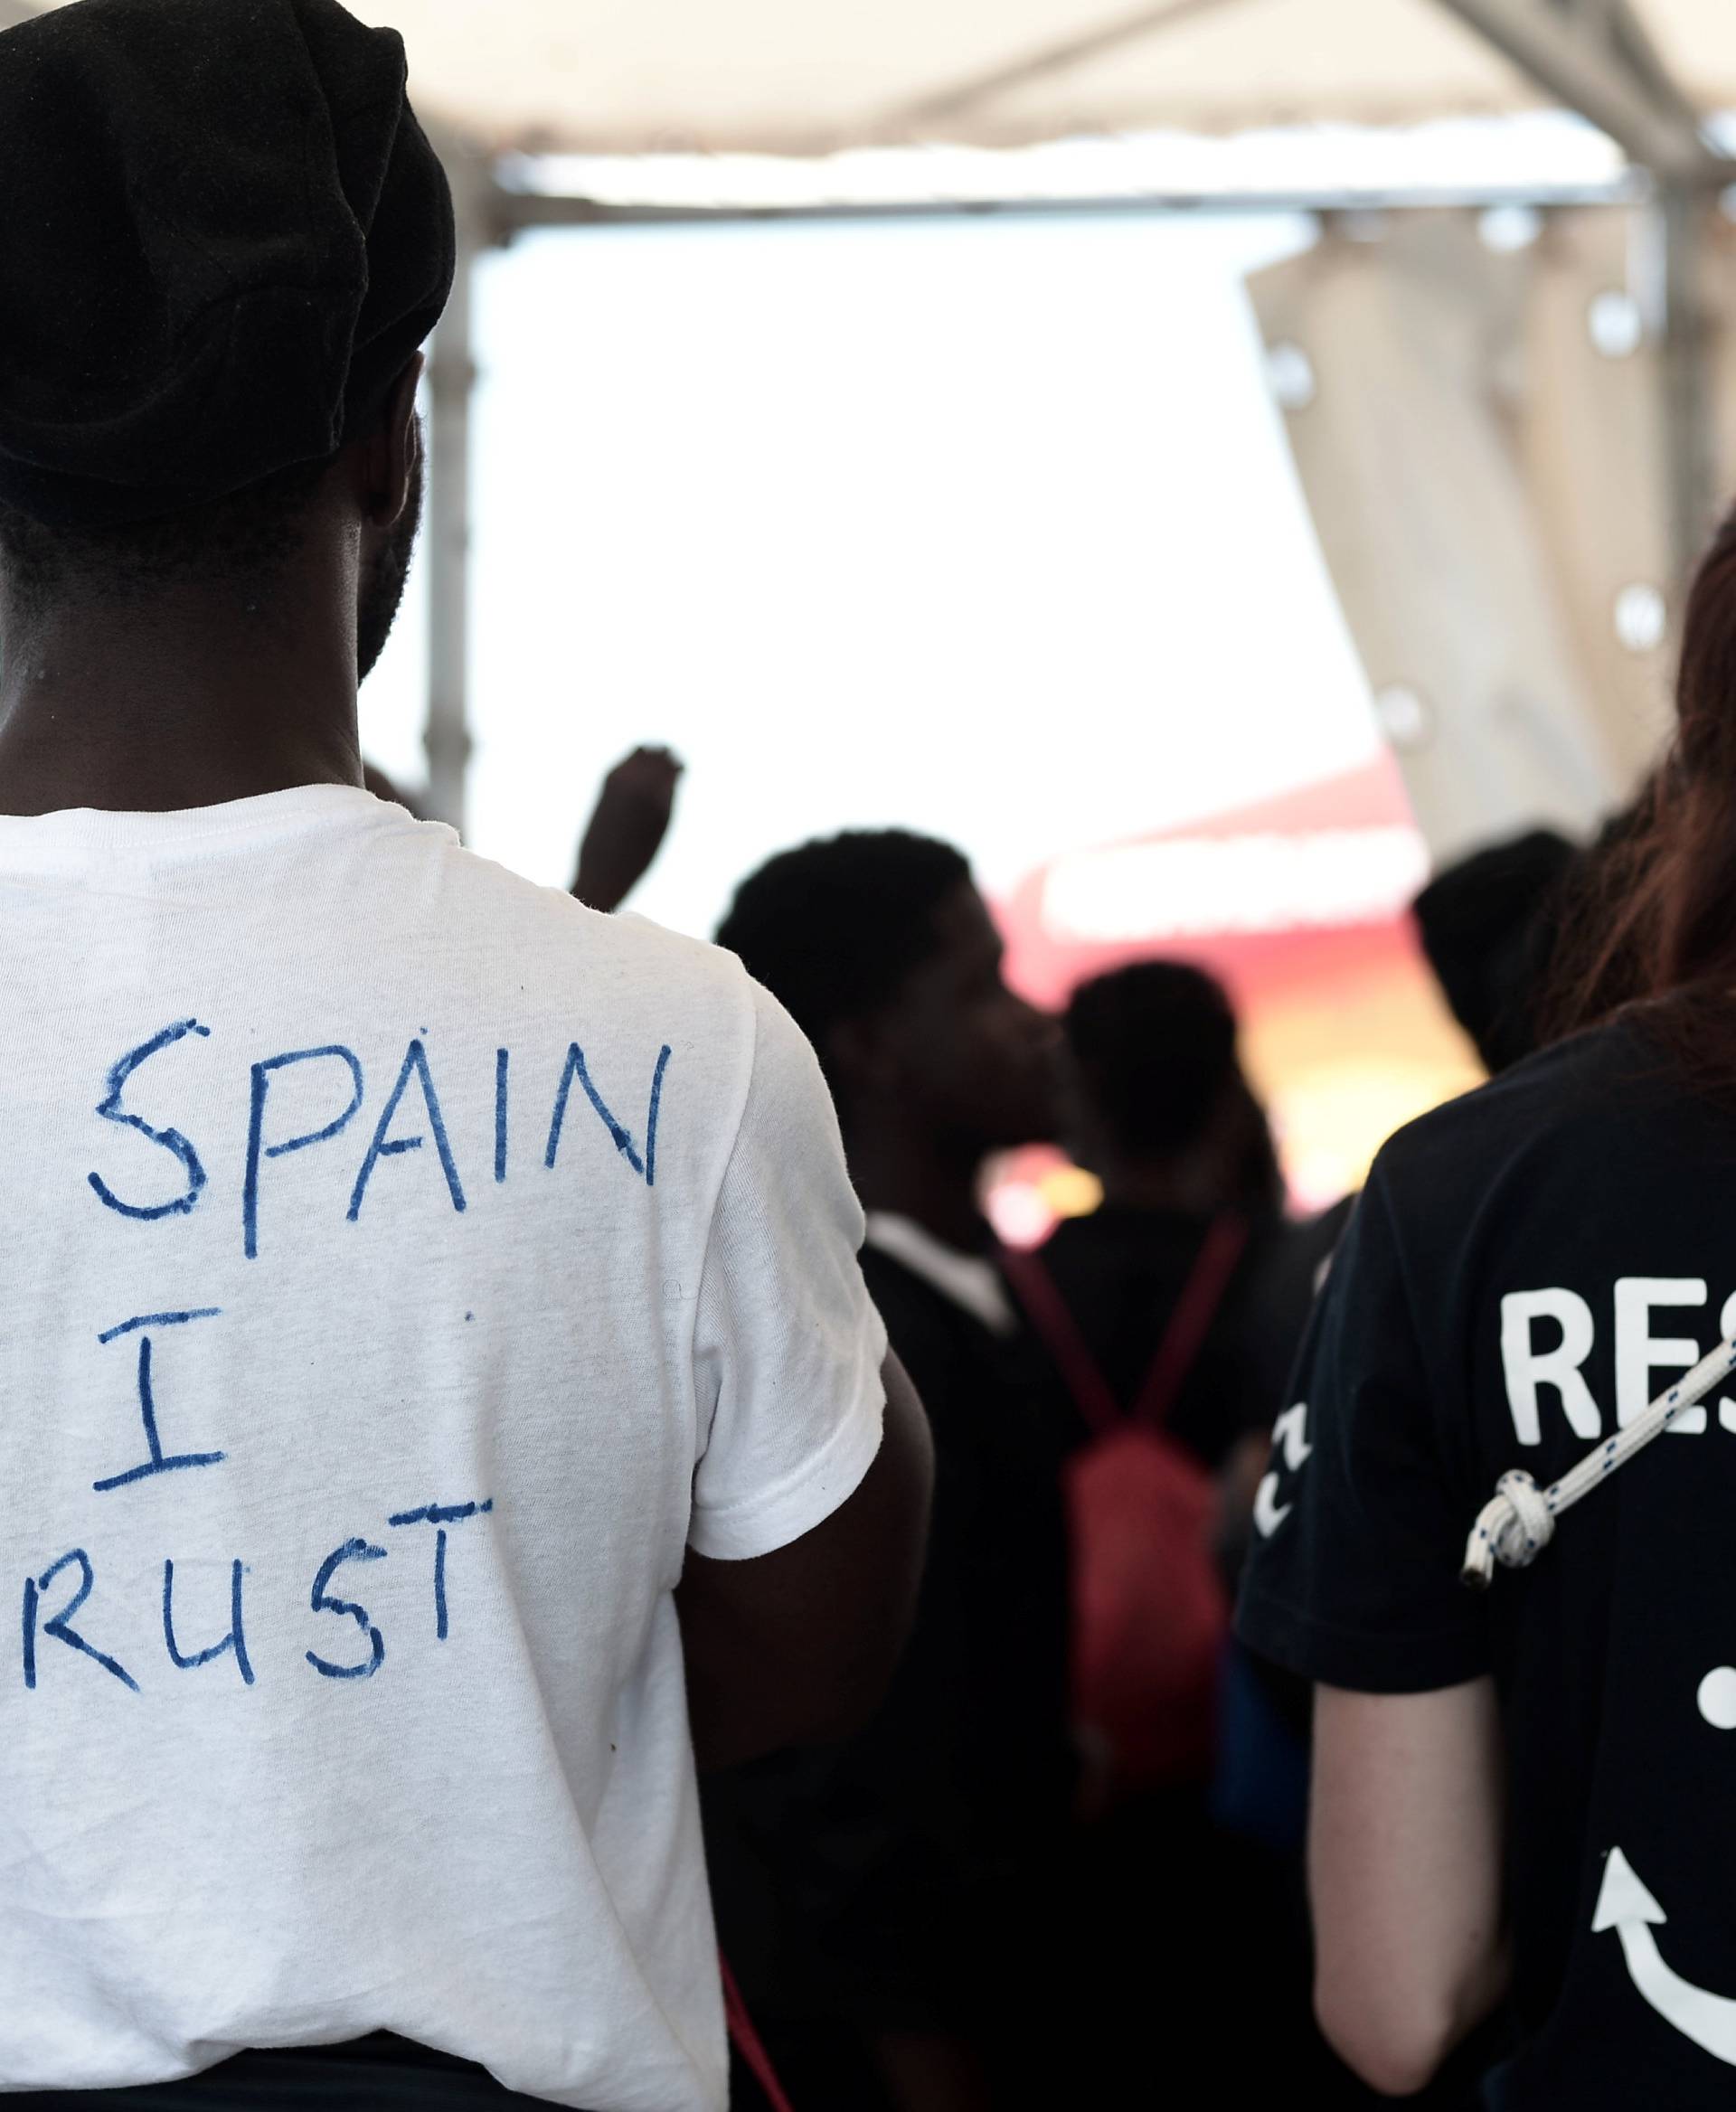 A migrant wearing a t-shirt reading "In Spain I Trust" waits to disembark from the Aquarius rescue ship at port in Valencia